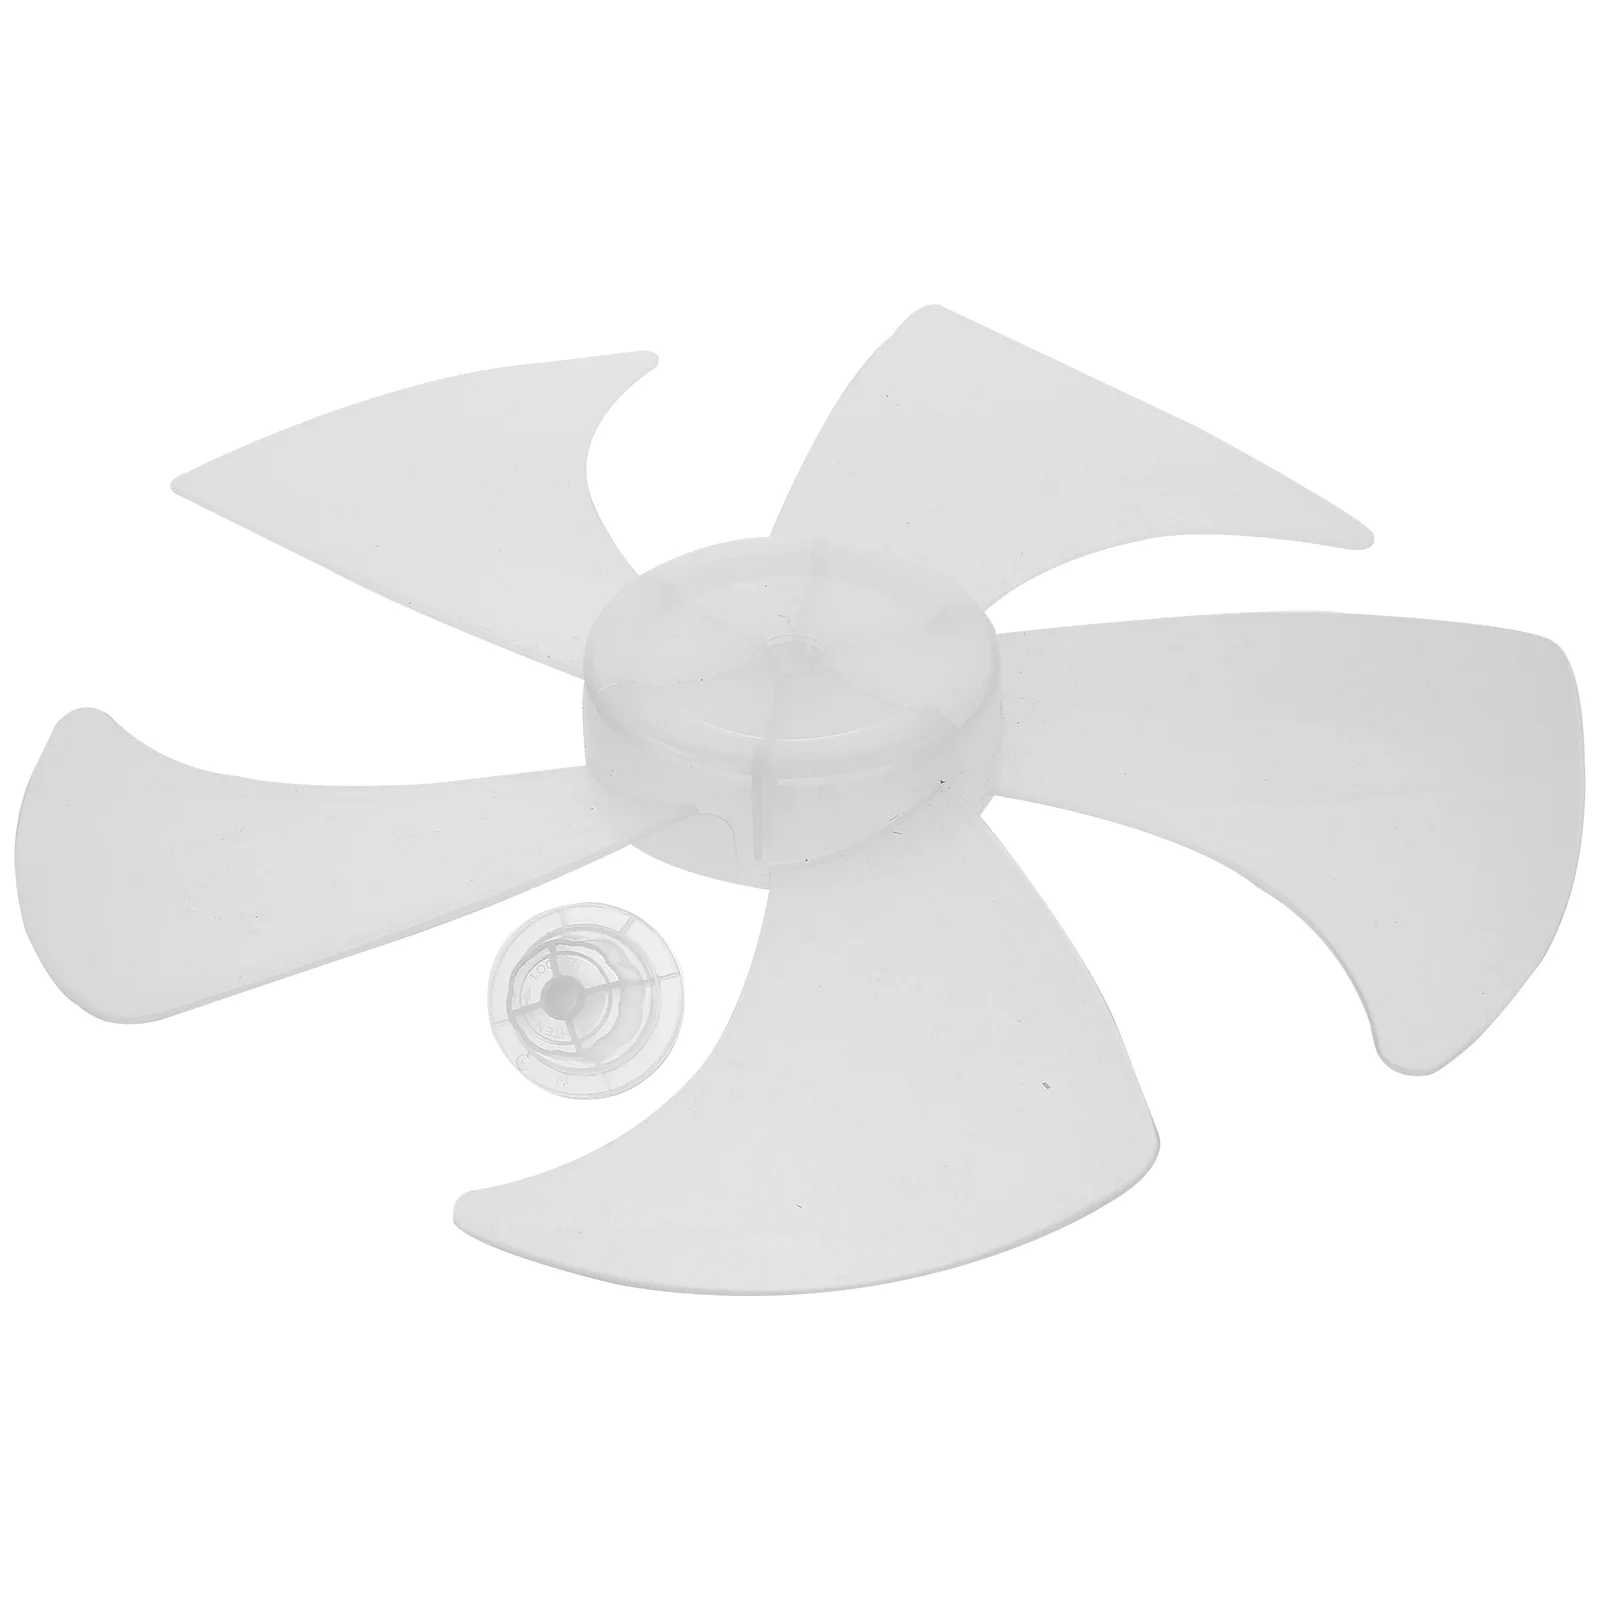 

Fridge Stand Floor 14 Inch Blades Replacement Condenser Standing Pedestal Accessory White Plastic Table Supply